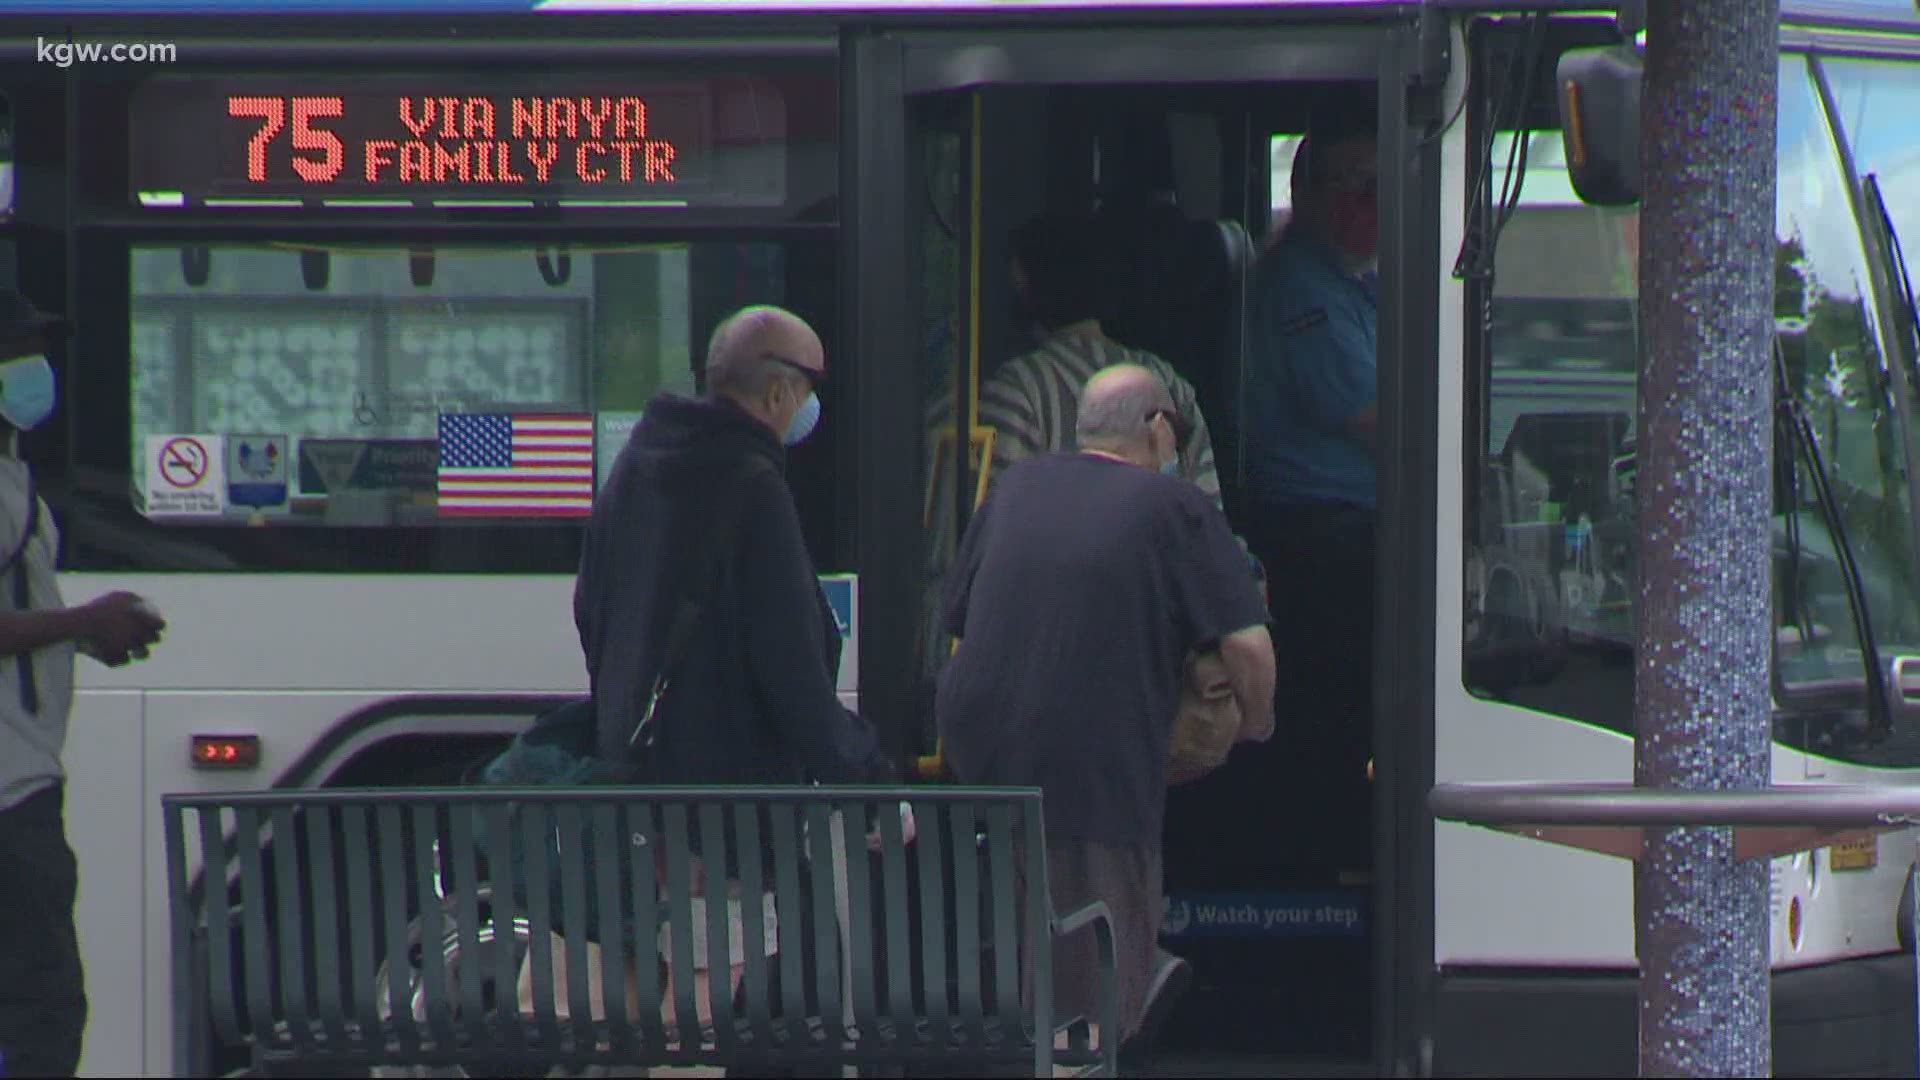 TriMet will allow more riders onto its buses and trains but face coverings are still required.